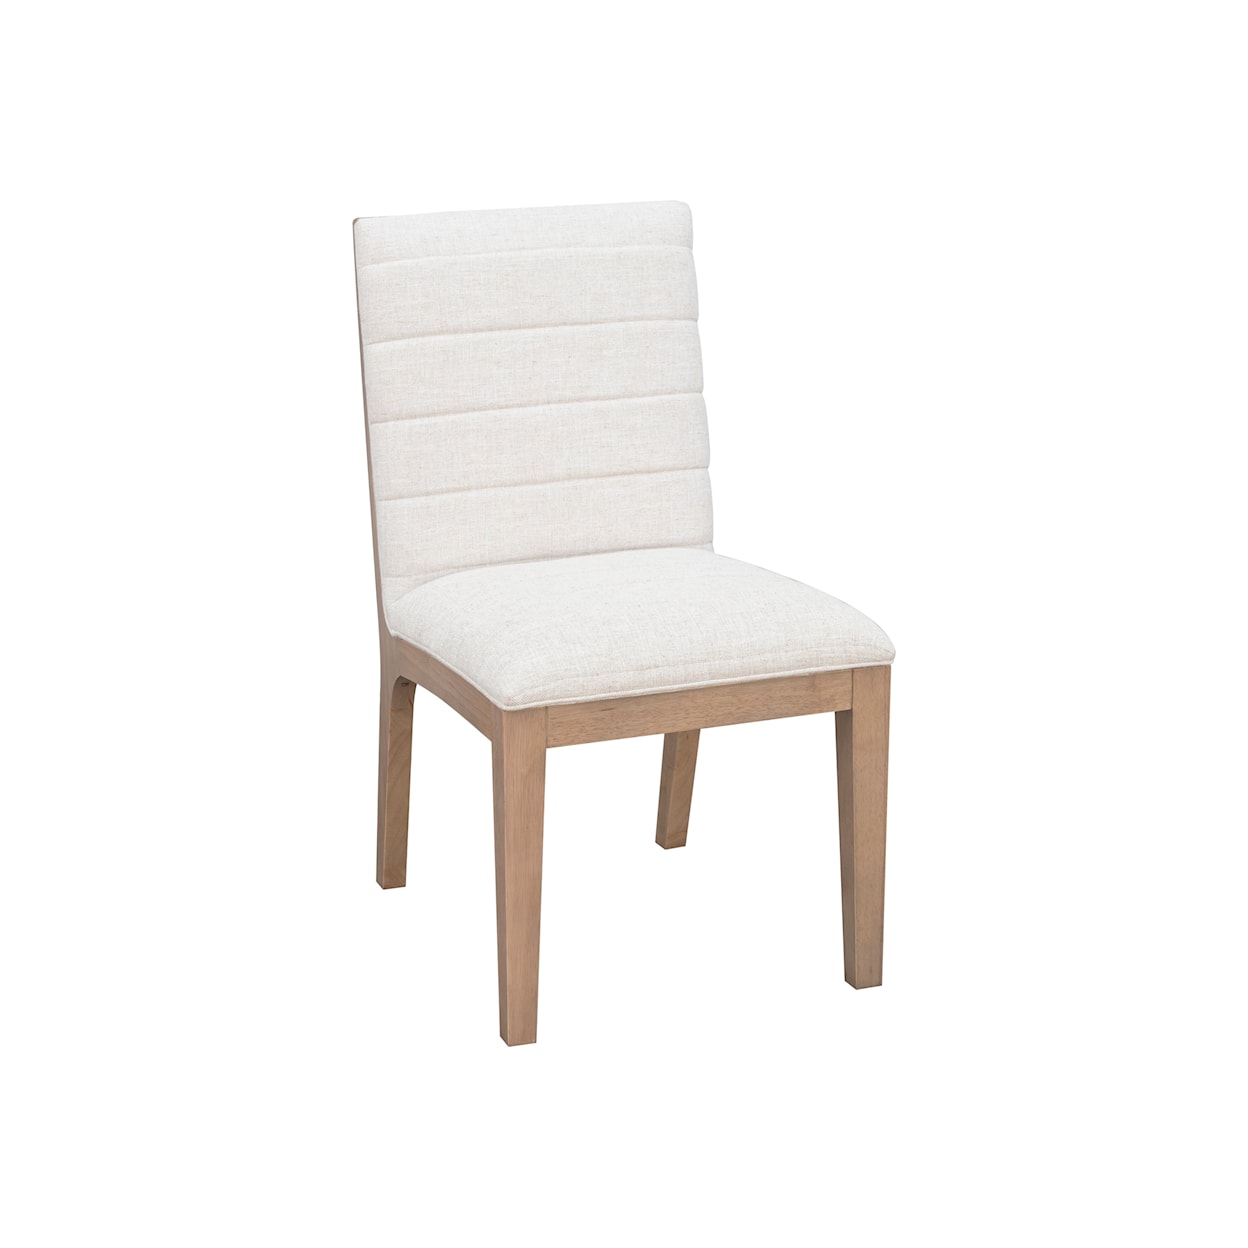 Modus International Sumire Upholstered Side Dining Chair